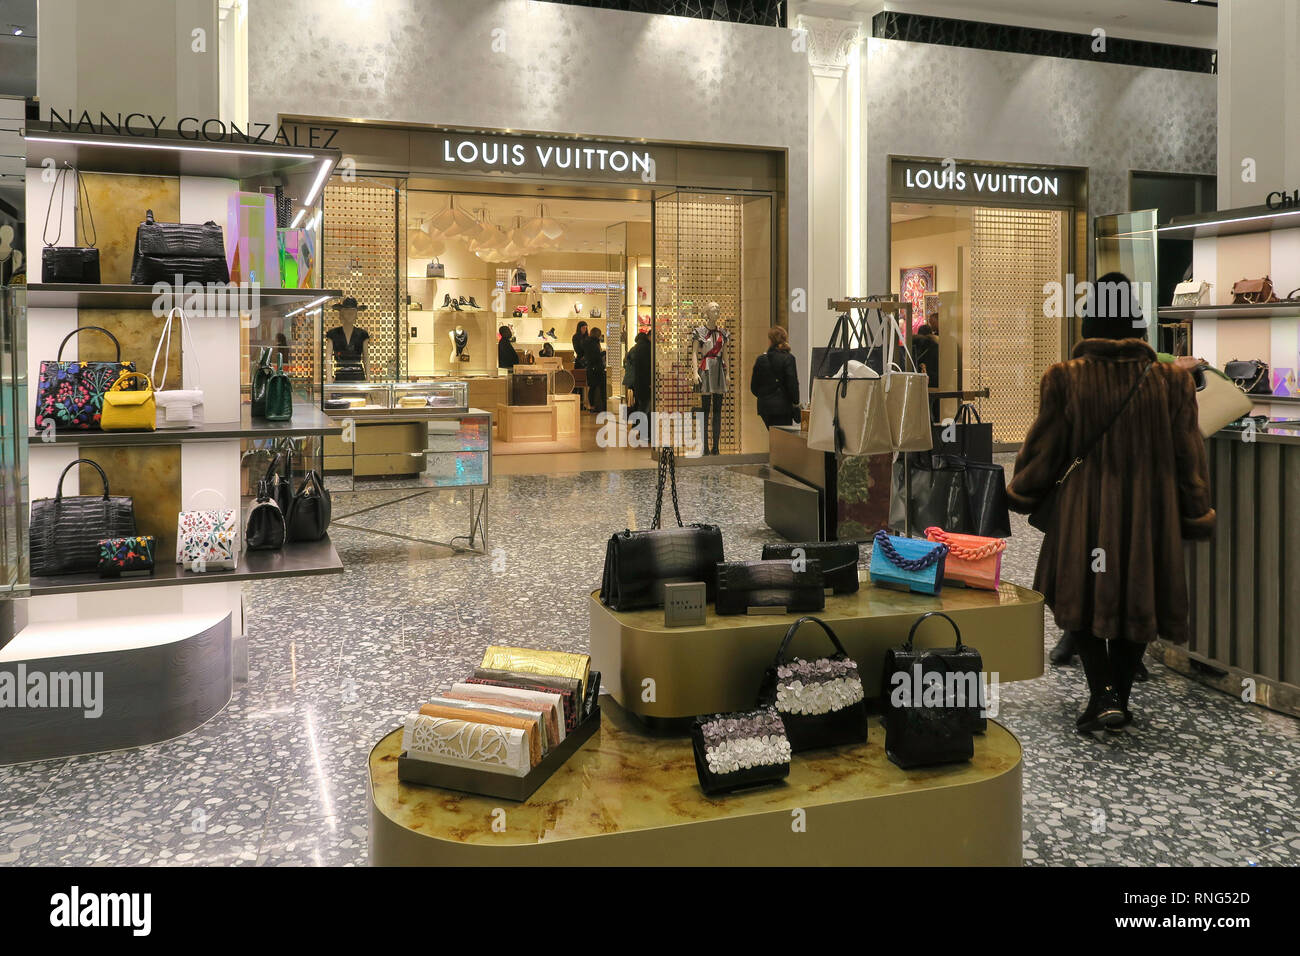 Michael Kors Unveils First U.S. Lifestyle Store in Aventura Mall